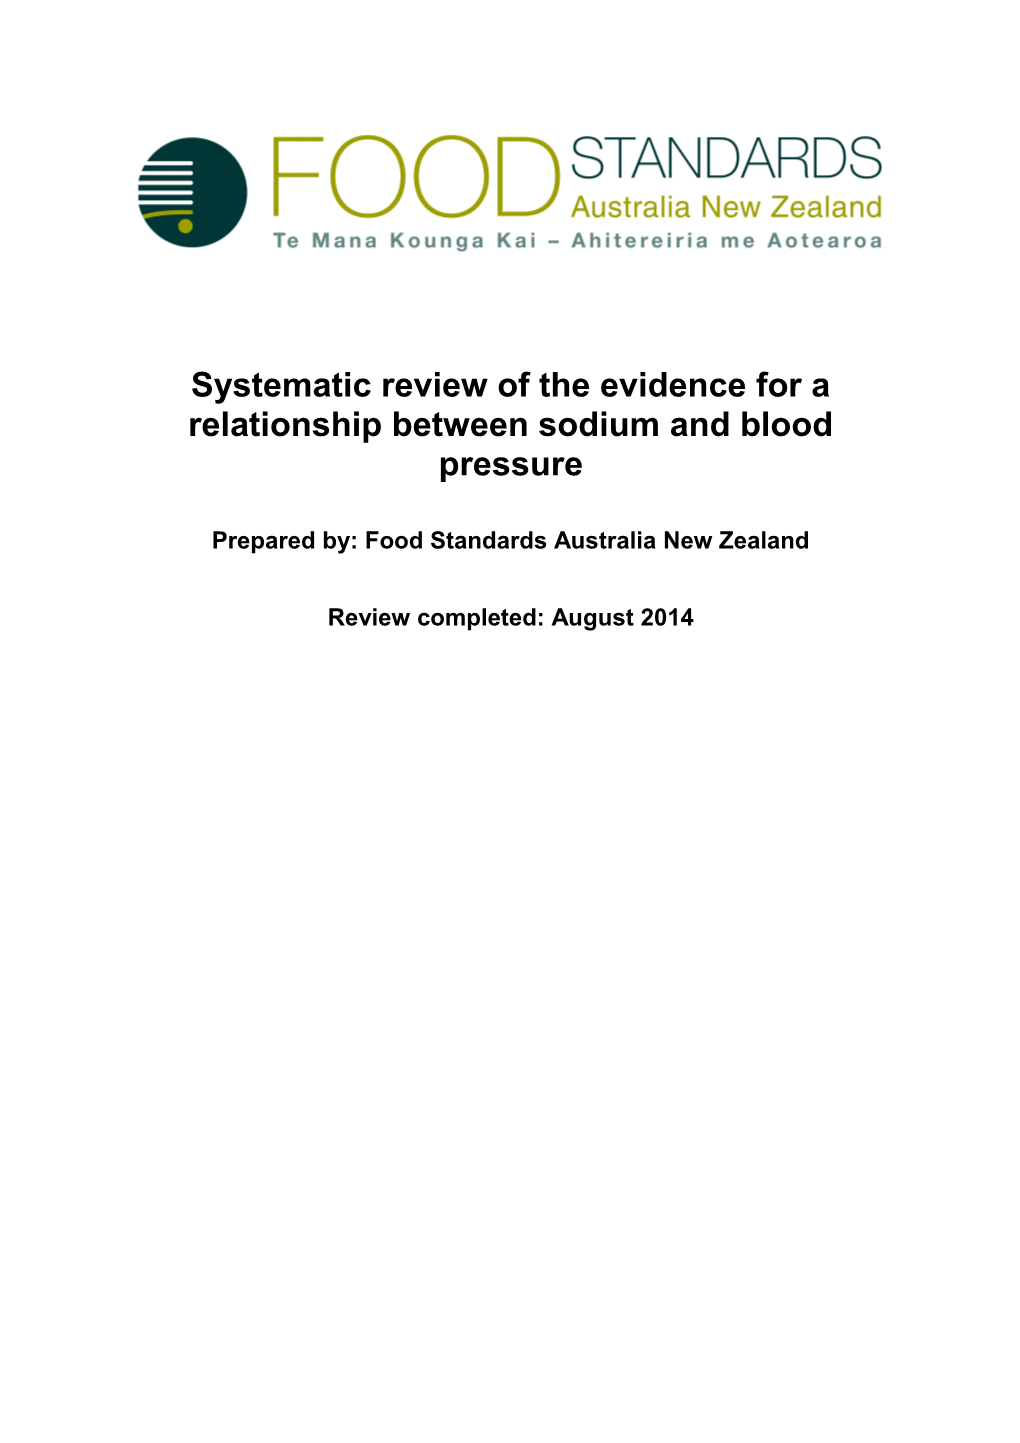 Systematic Review of the Evidence for a Relationship Between Sodium and Blood Pressure